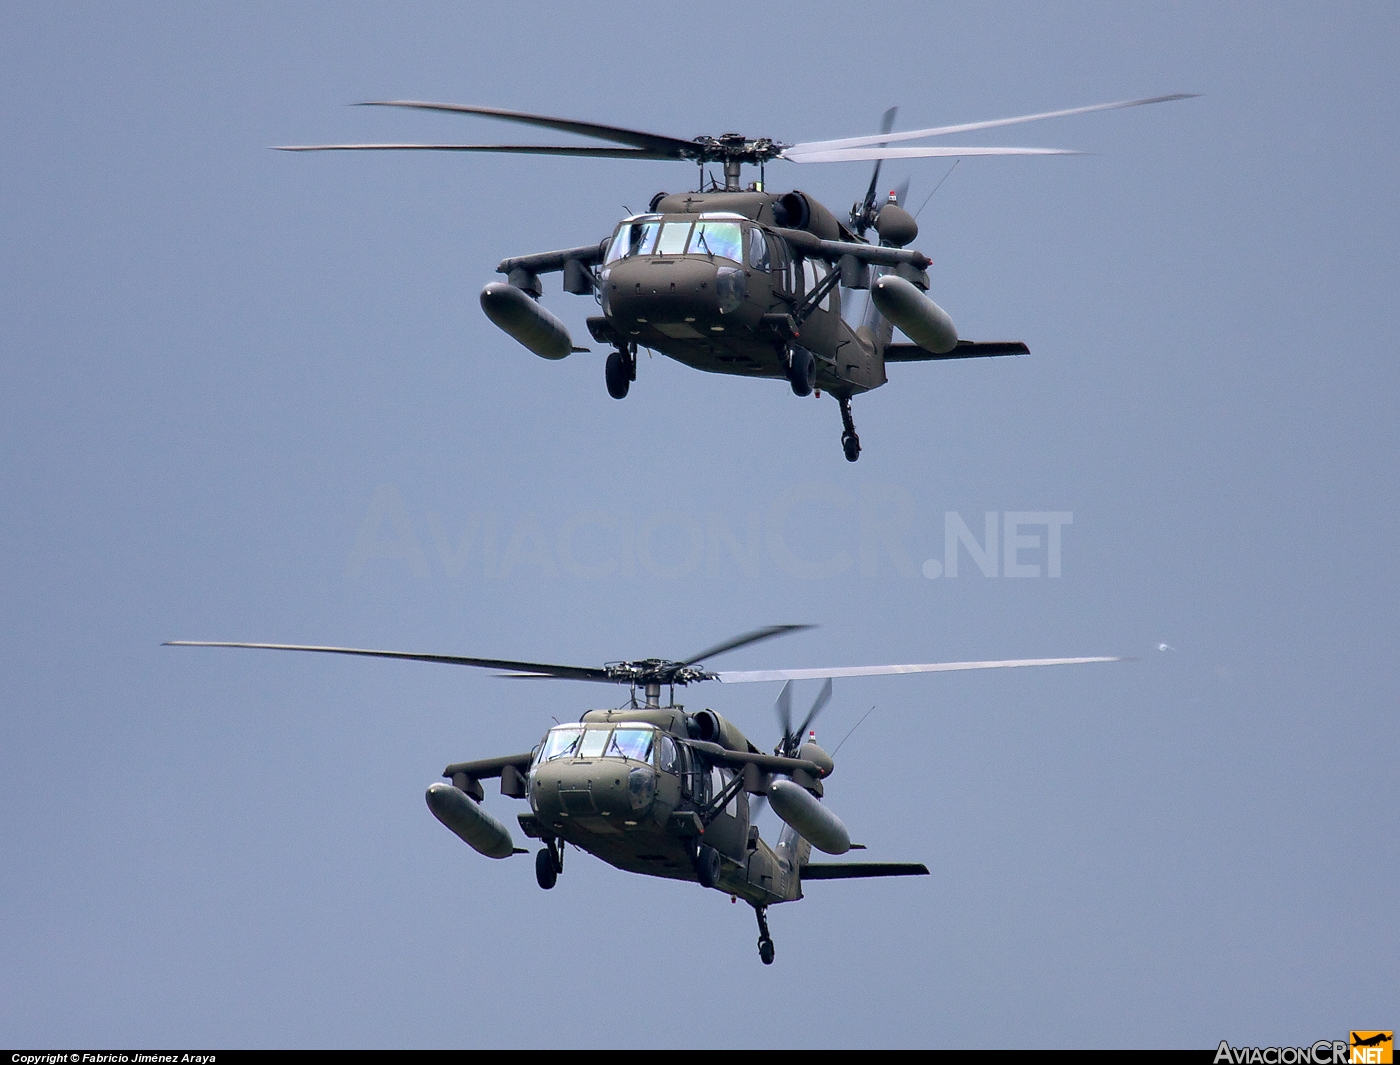 01-26880 - Sikorsky UH-60L Black Hawk (S-70A) - United States Army